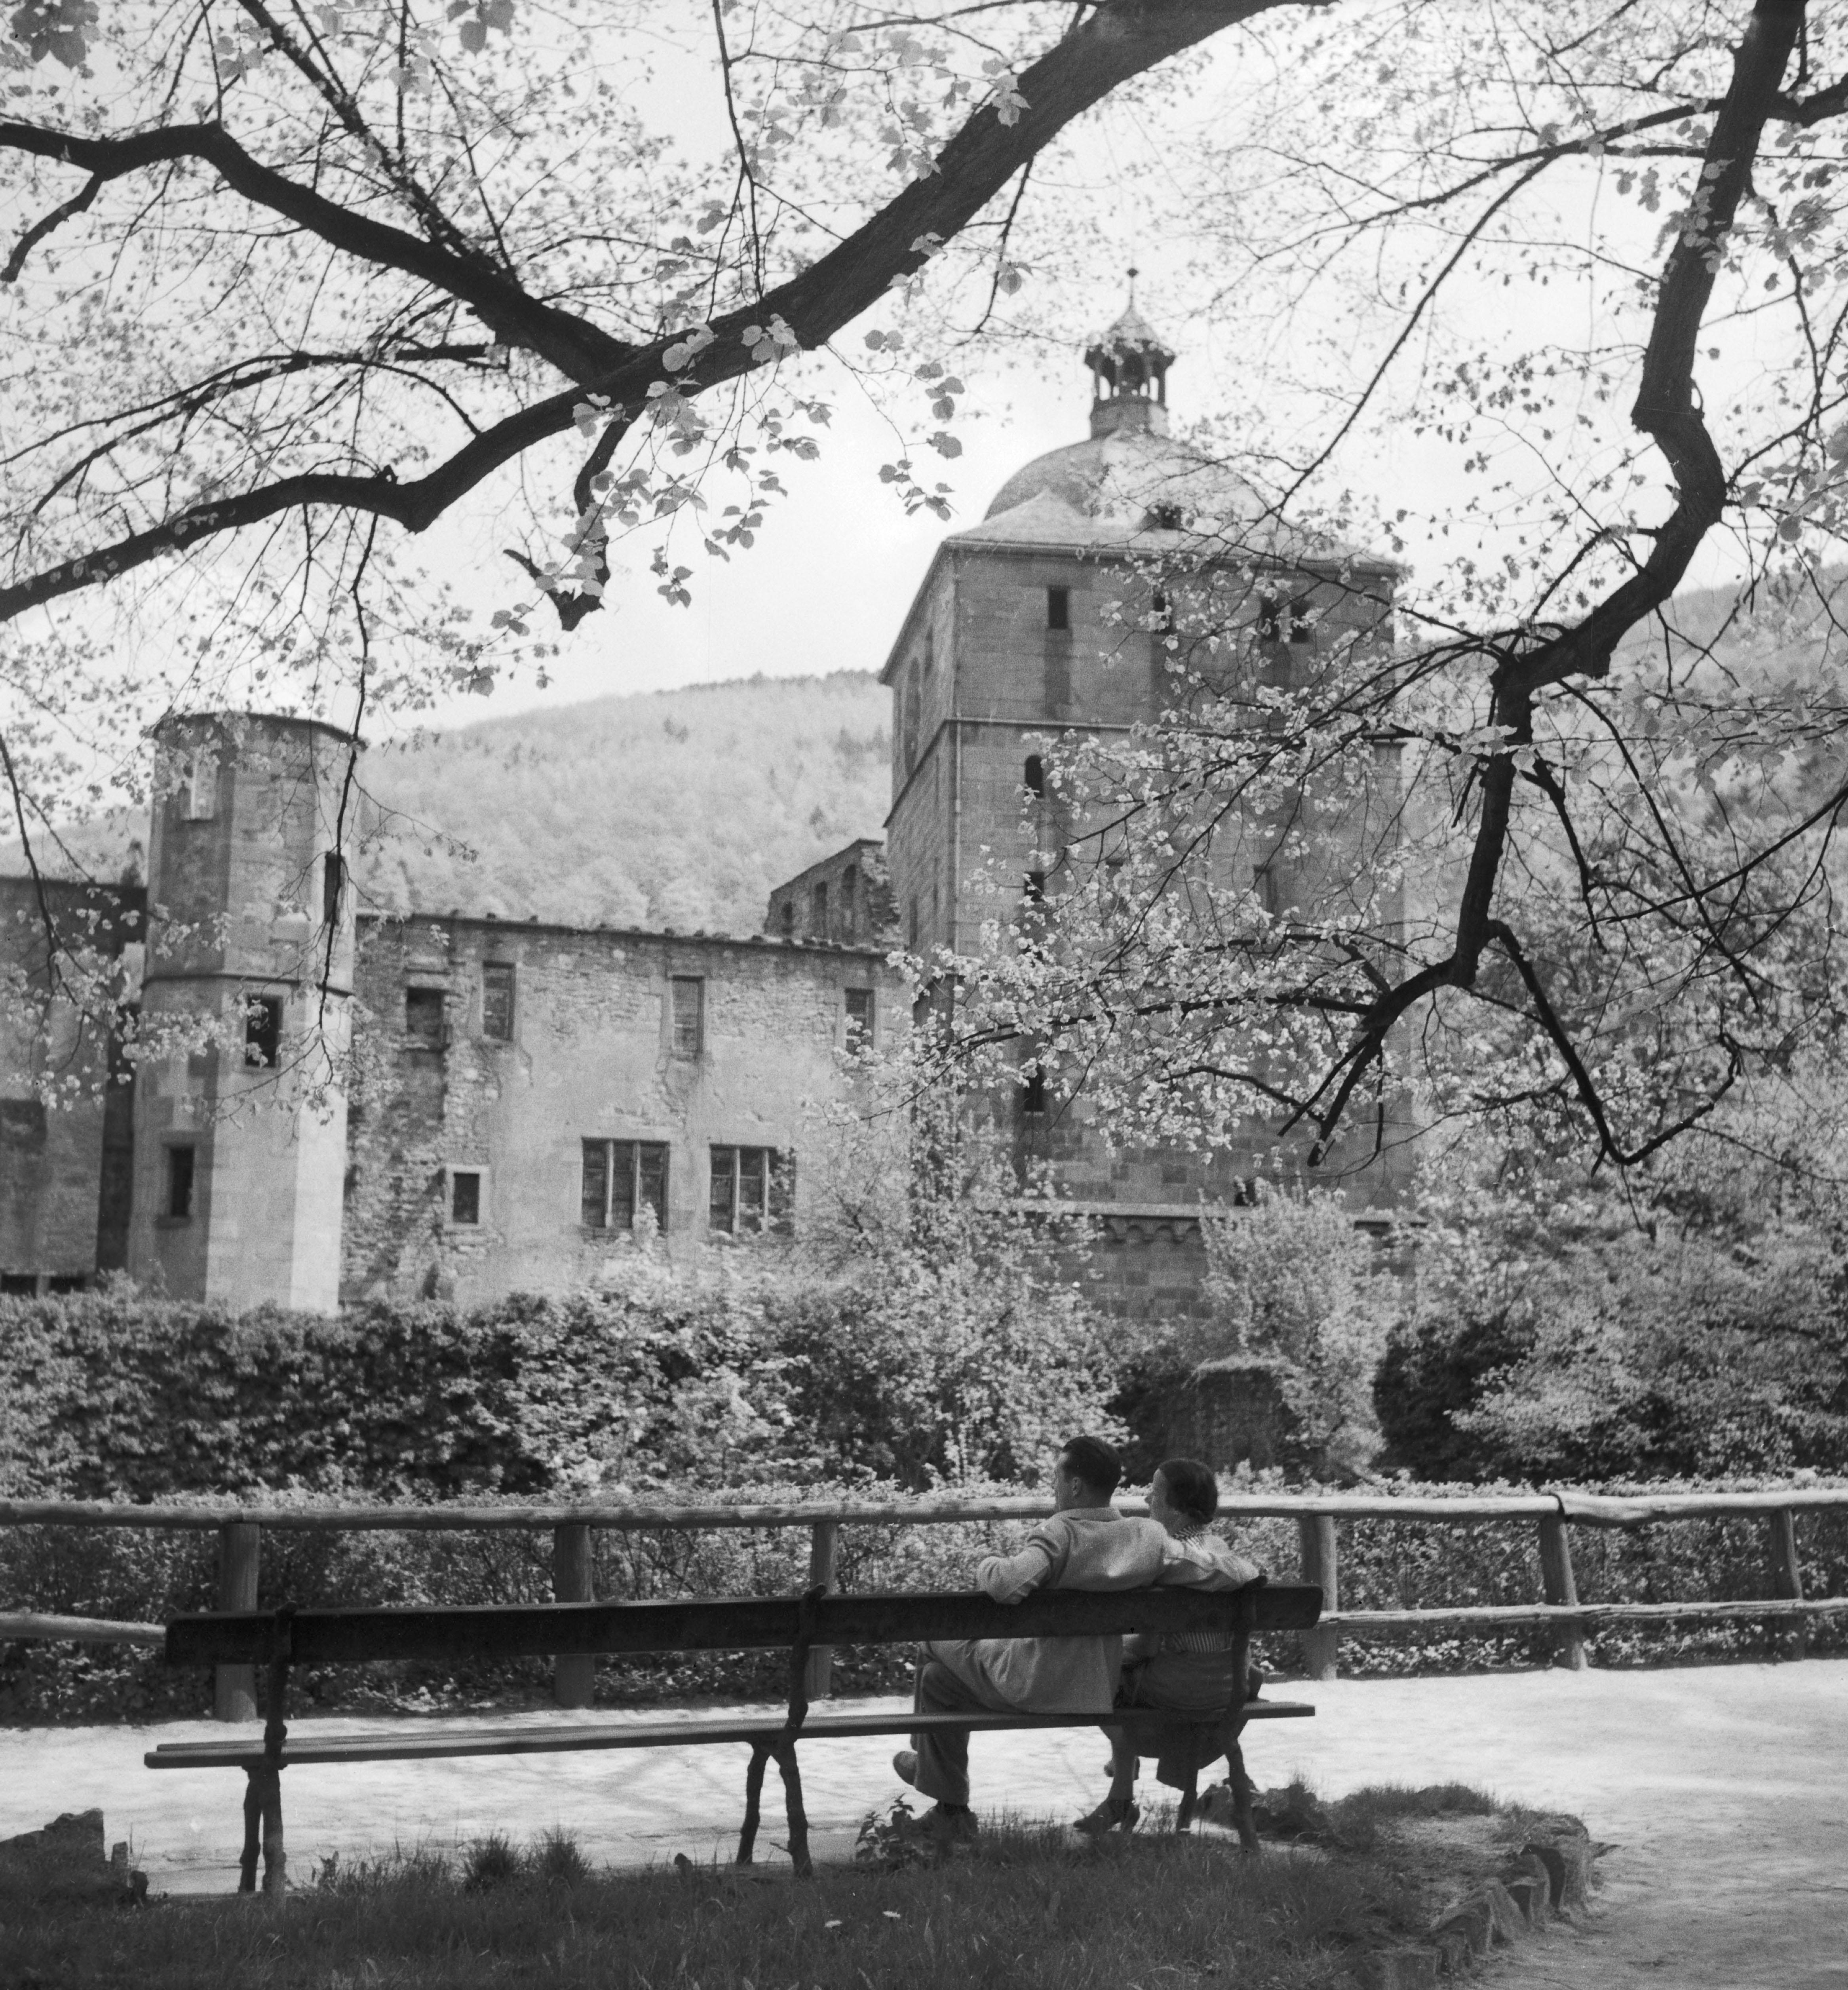 Karl Heinrich Lämmel Black and White Photograph - Couple on bench at Heidelberg castle, Germany 1936, Printed Later 